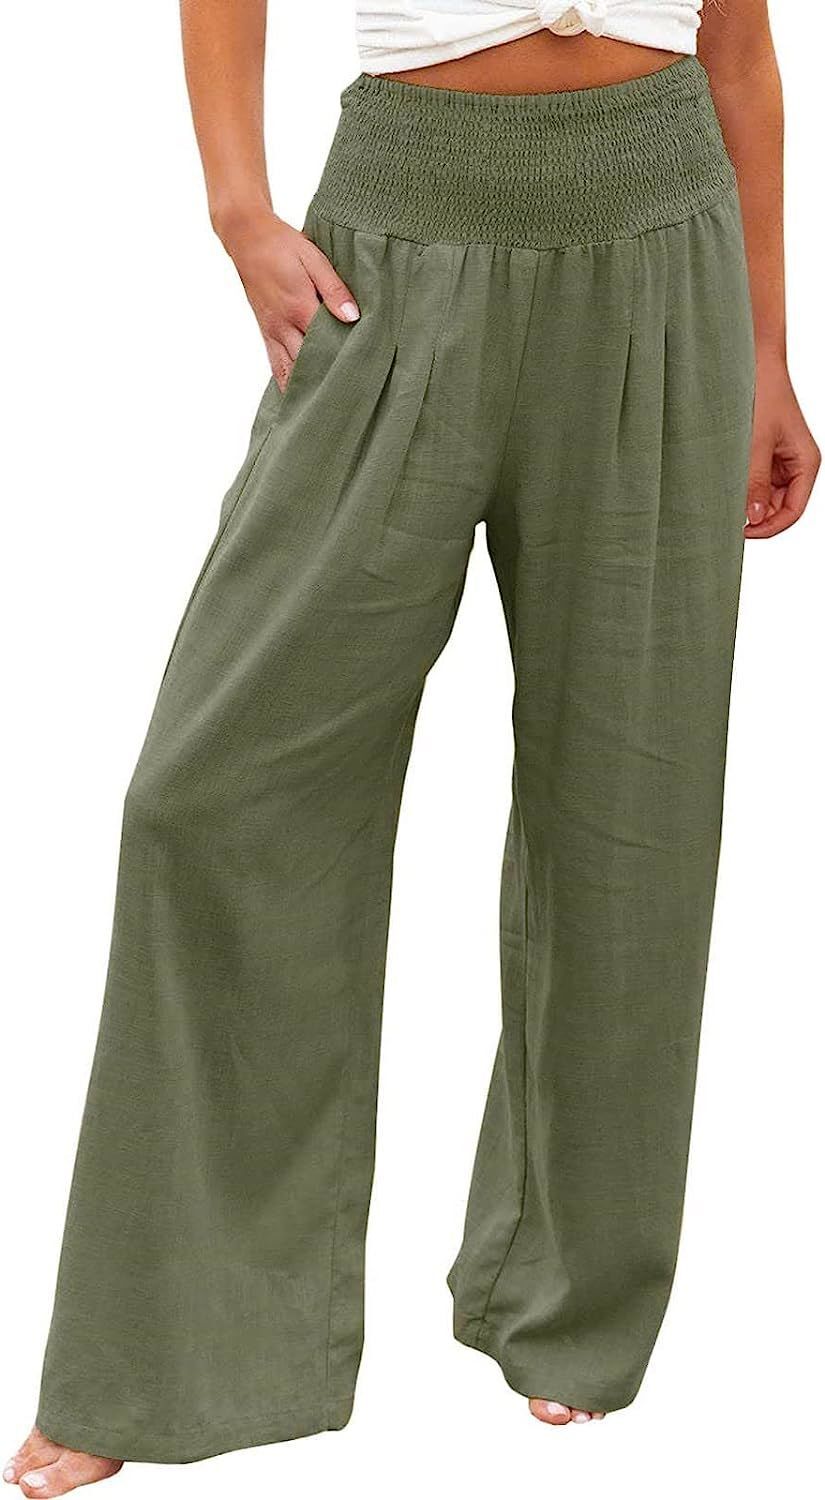 TUNUSKAT Womens Cotton Linen Wide Leg Pants Summer Casual High Waisted Palazzo Pants Baggy Lounge beach Trousers with Pocket